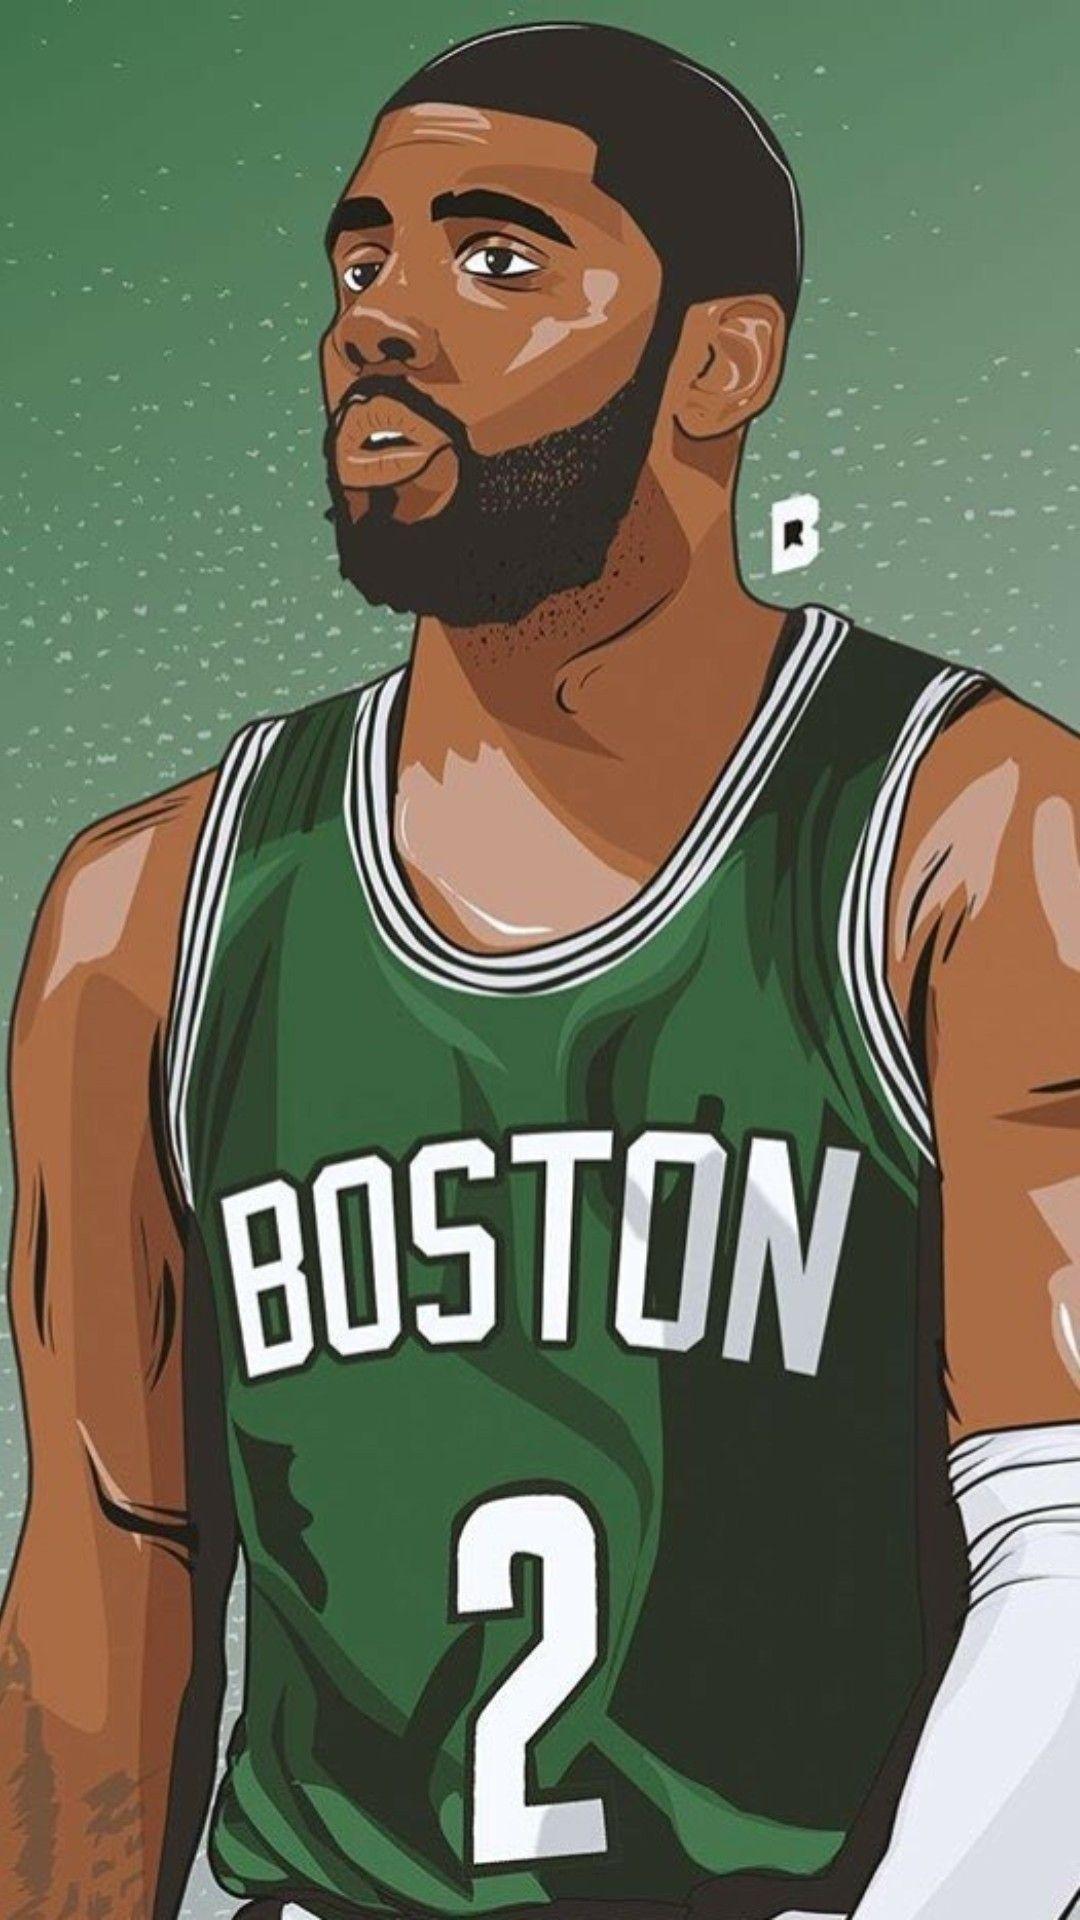 New Kyrie Irving Wallpaper. Download High Quality HD Image